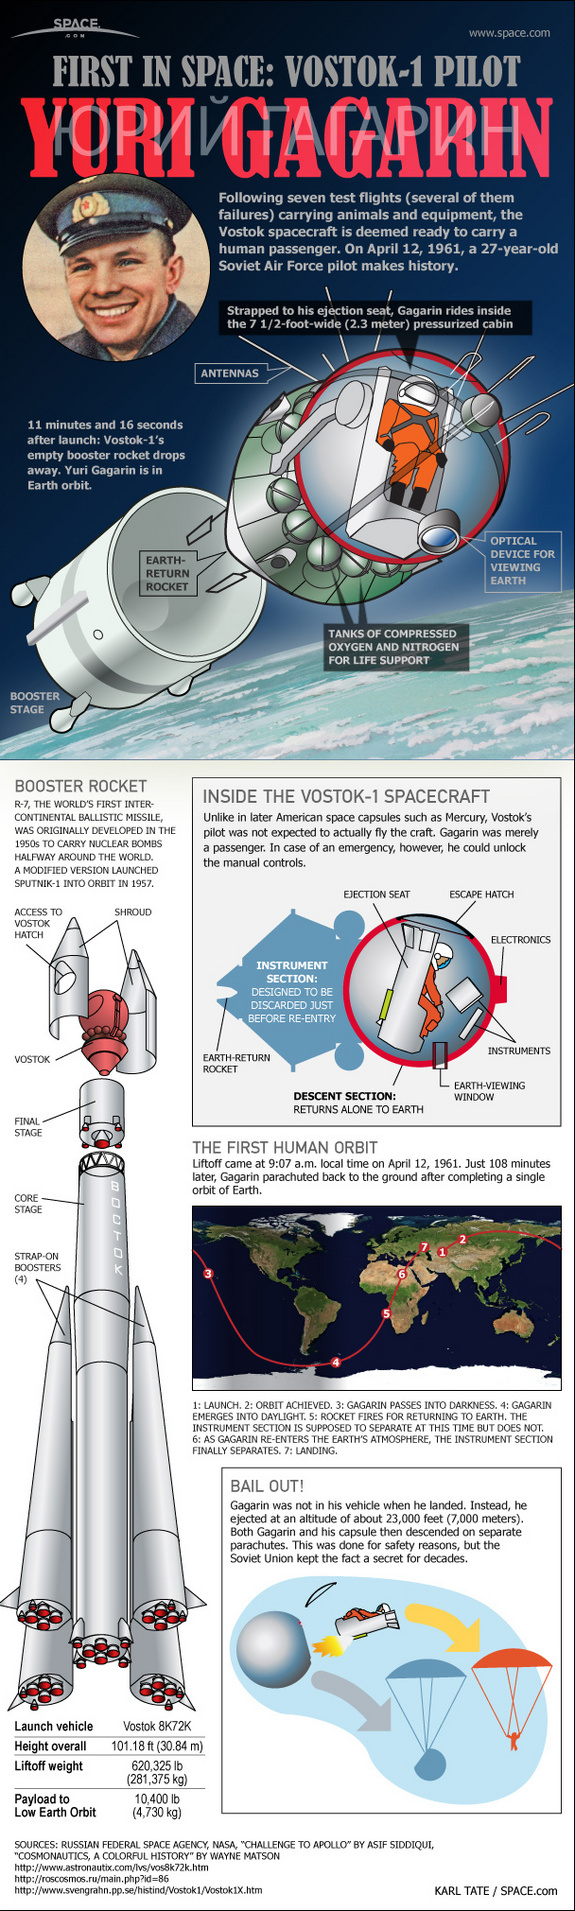 See how the first human spaceflight actually occurred when the Soviet Union launched cosmonaut Yuri Gagarin on Vostok 1 on April 12, 1961 in this SPACE.com infographic.